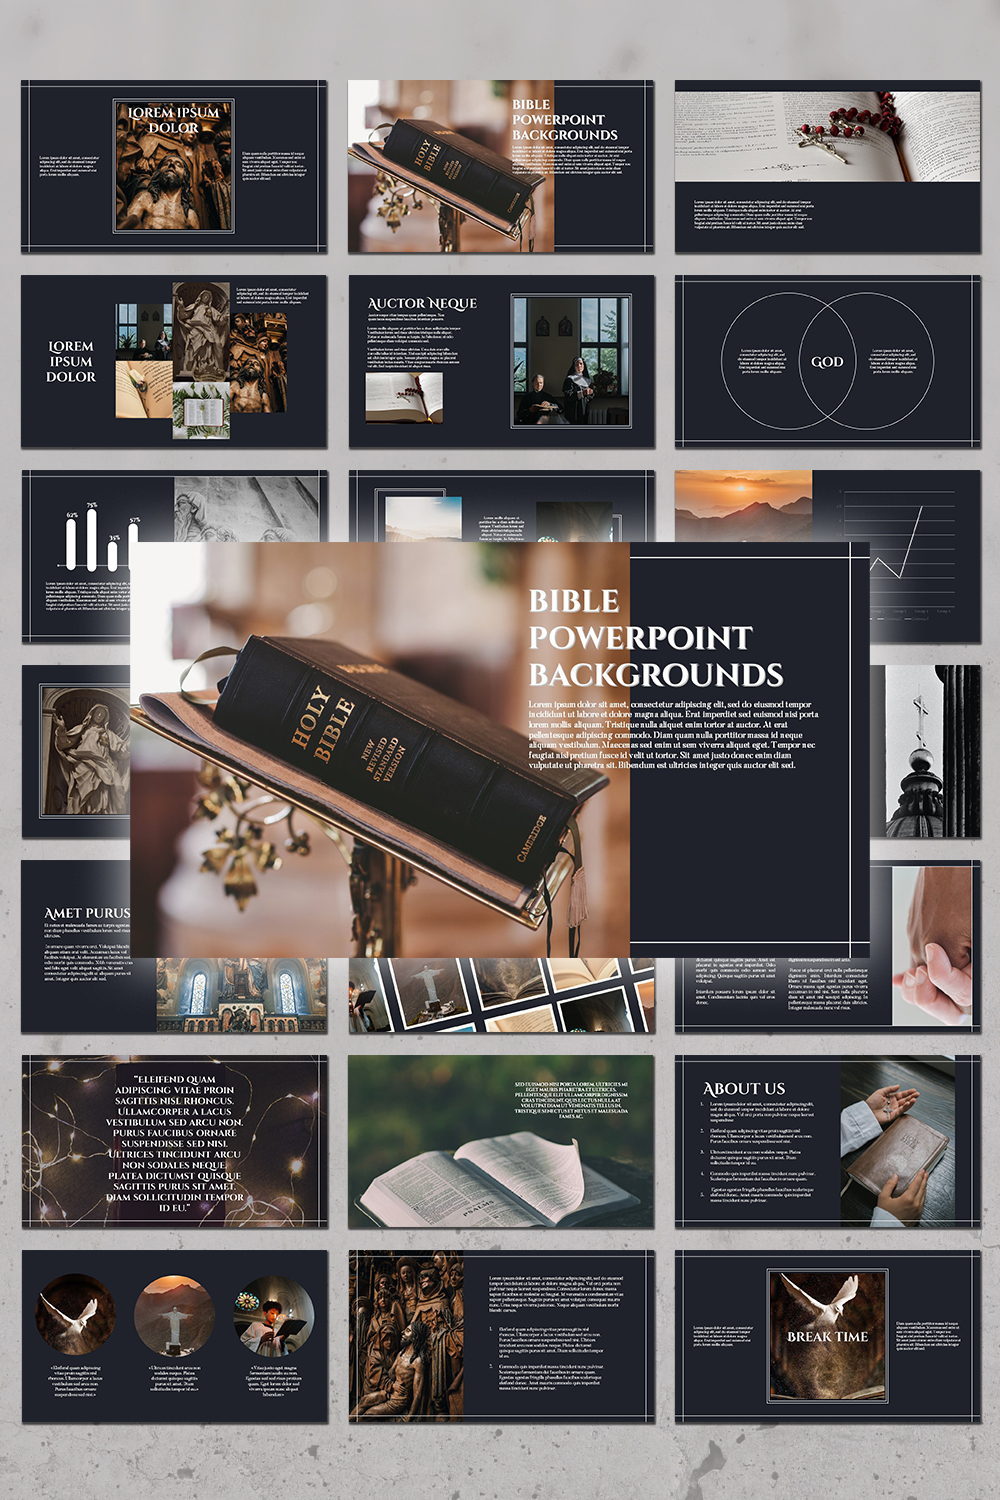 Bible powerpoint backgrounds images of pinterest.